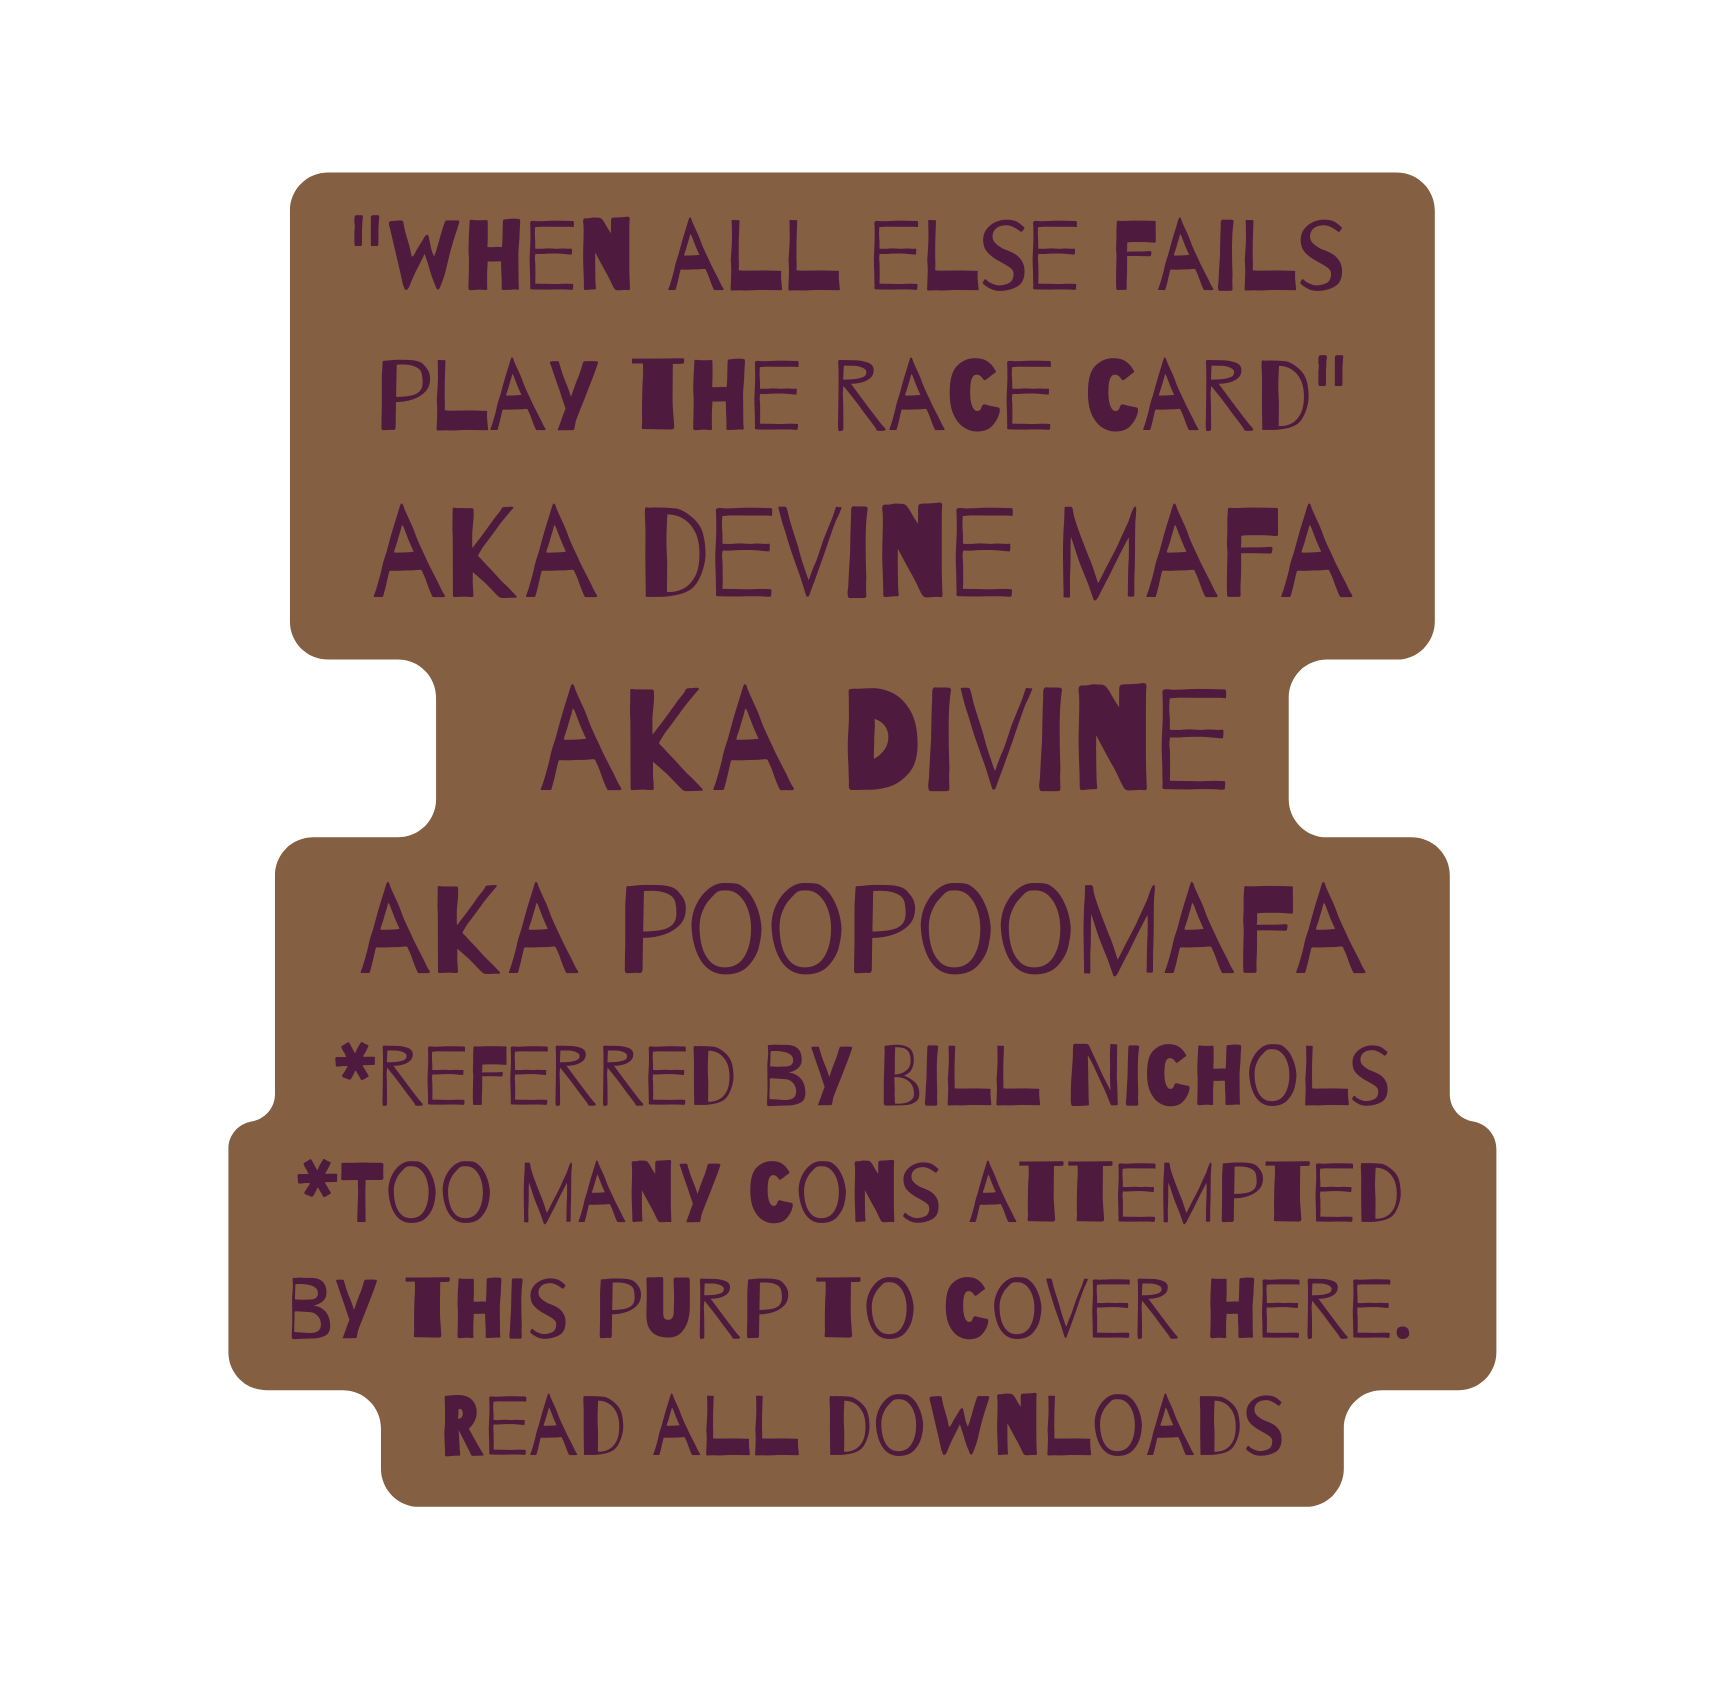 when all else fails play the race card aka devine mafa aka Divine aka poopoomafa referred by Bill Nichols Too many cons attempted by this purp to cover here Read all downloads